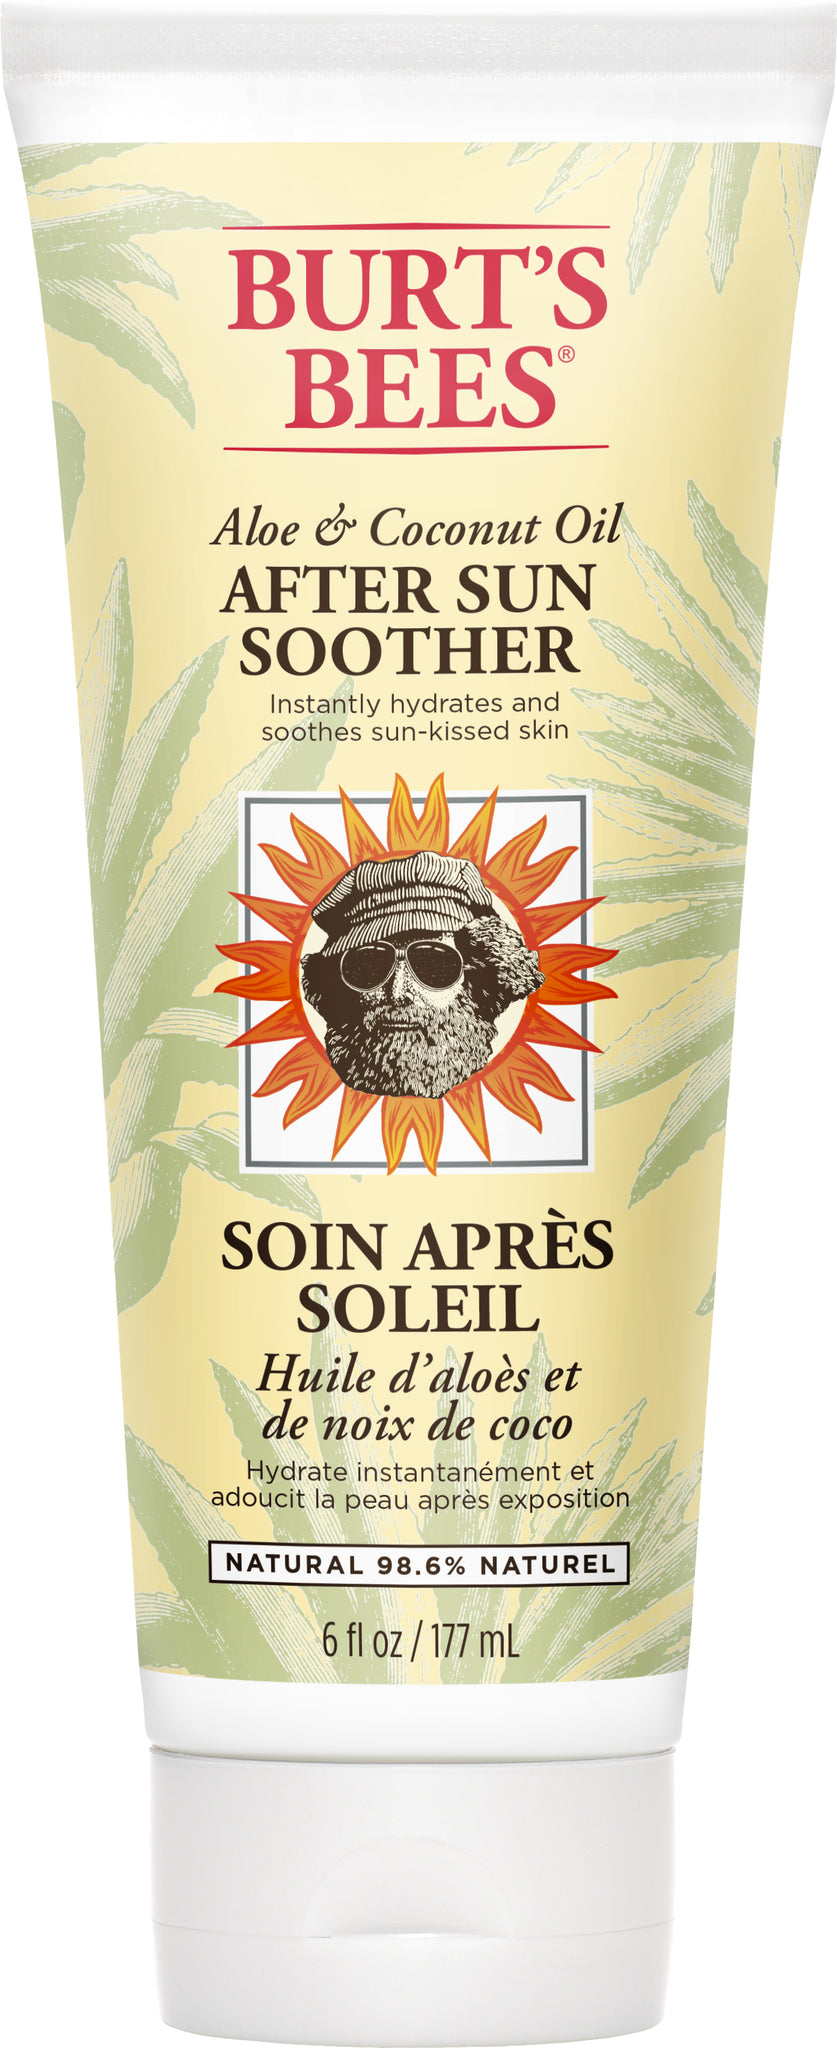 Burt's Bees Aloe After Sun Soother 177 ml